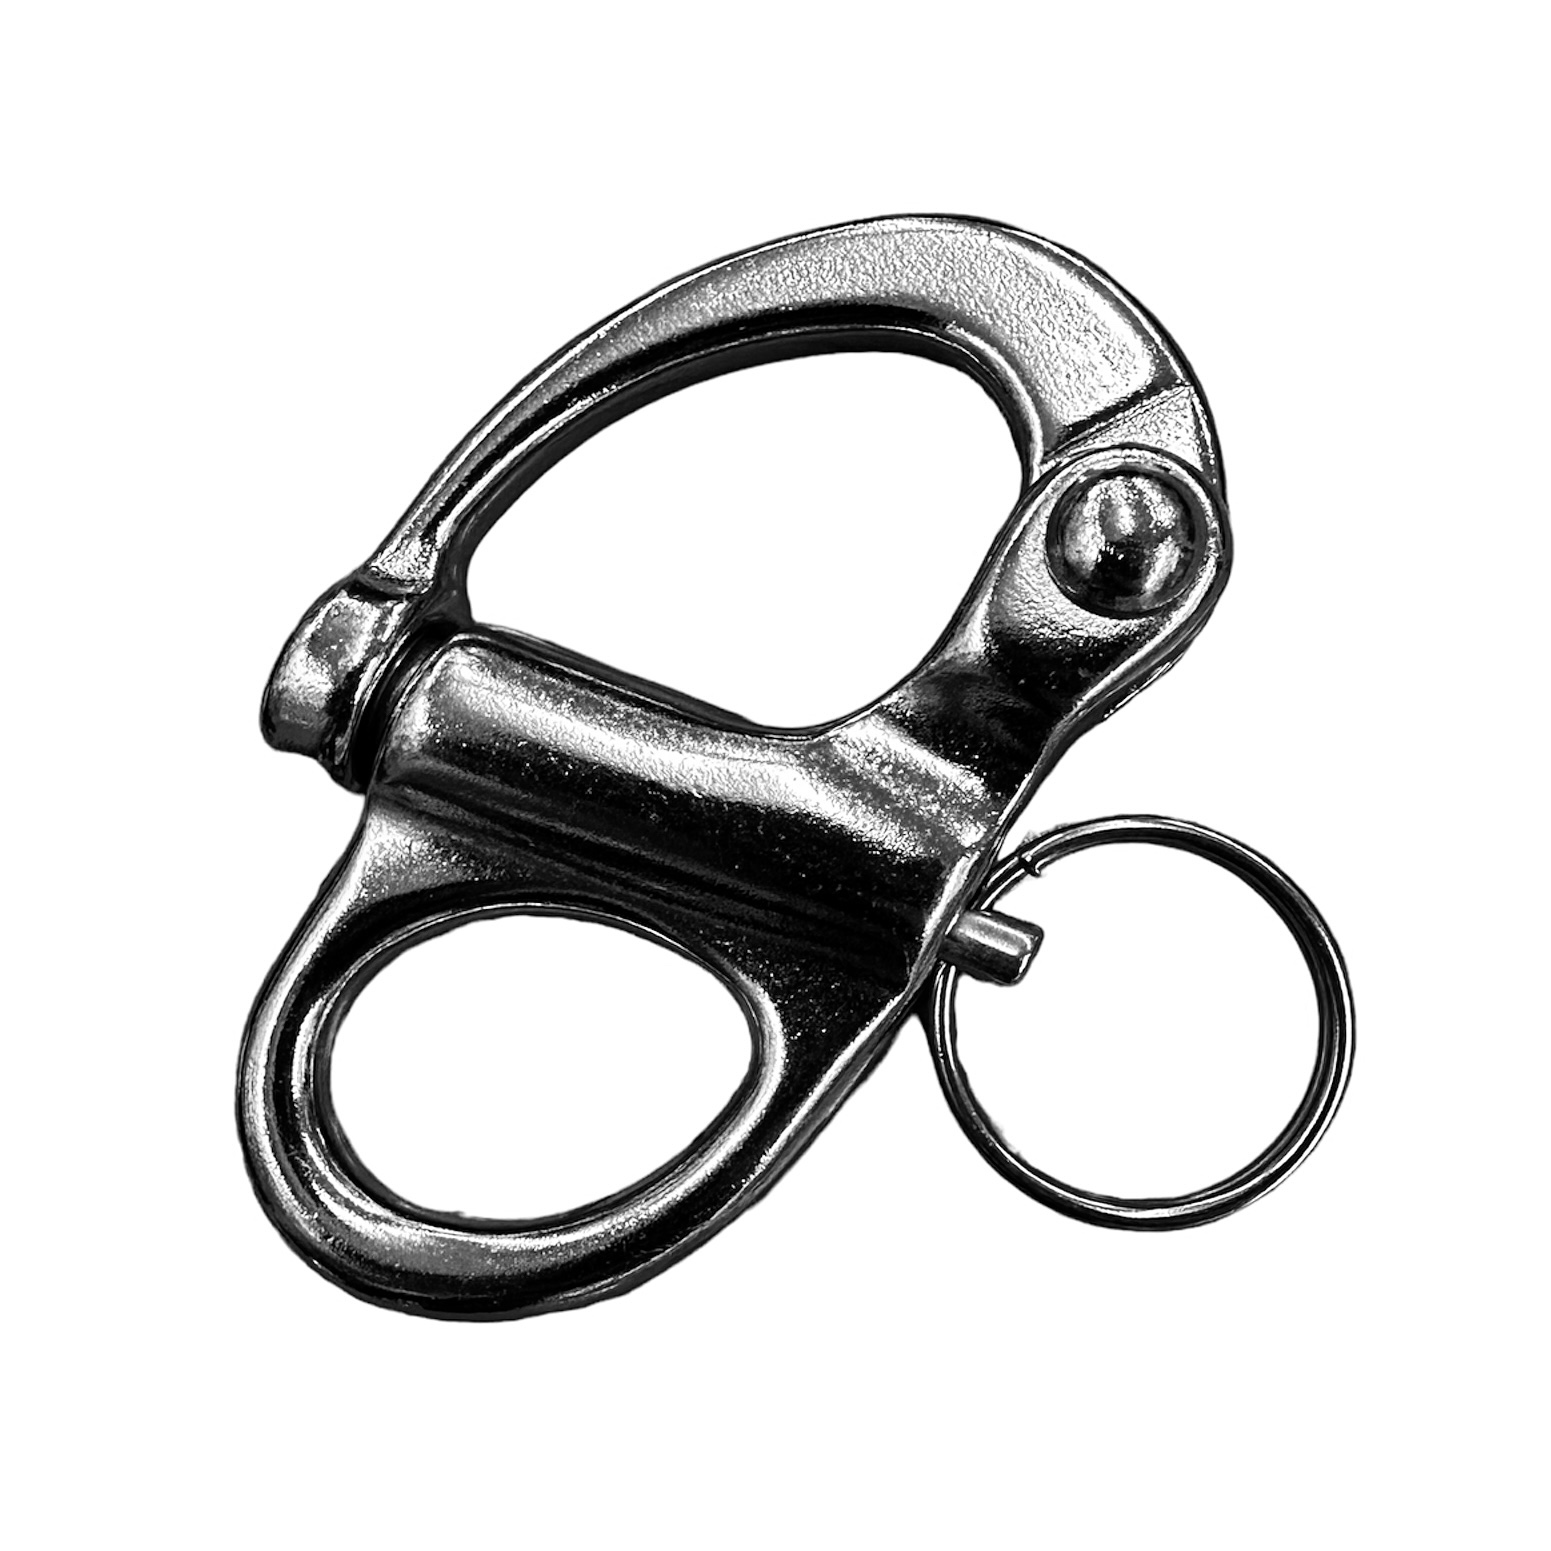 AISI304 Stainless Steel - Snap Shackle Large (2pcs)